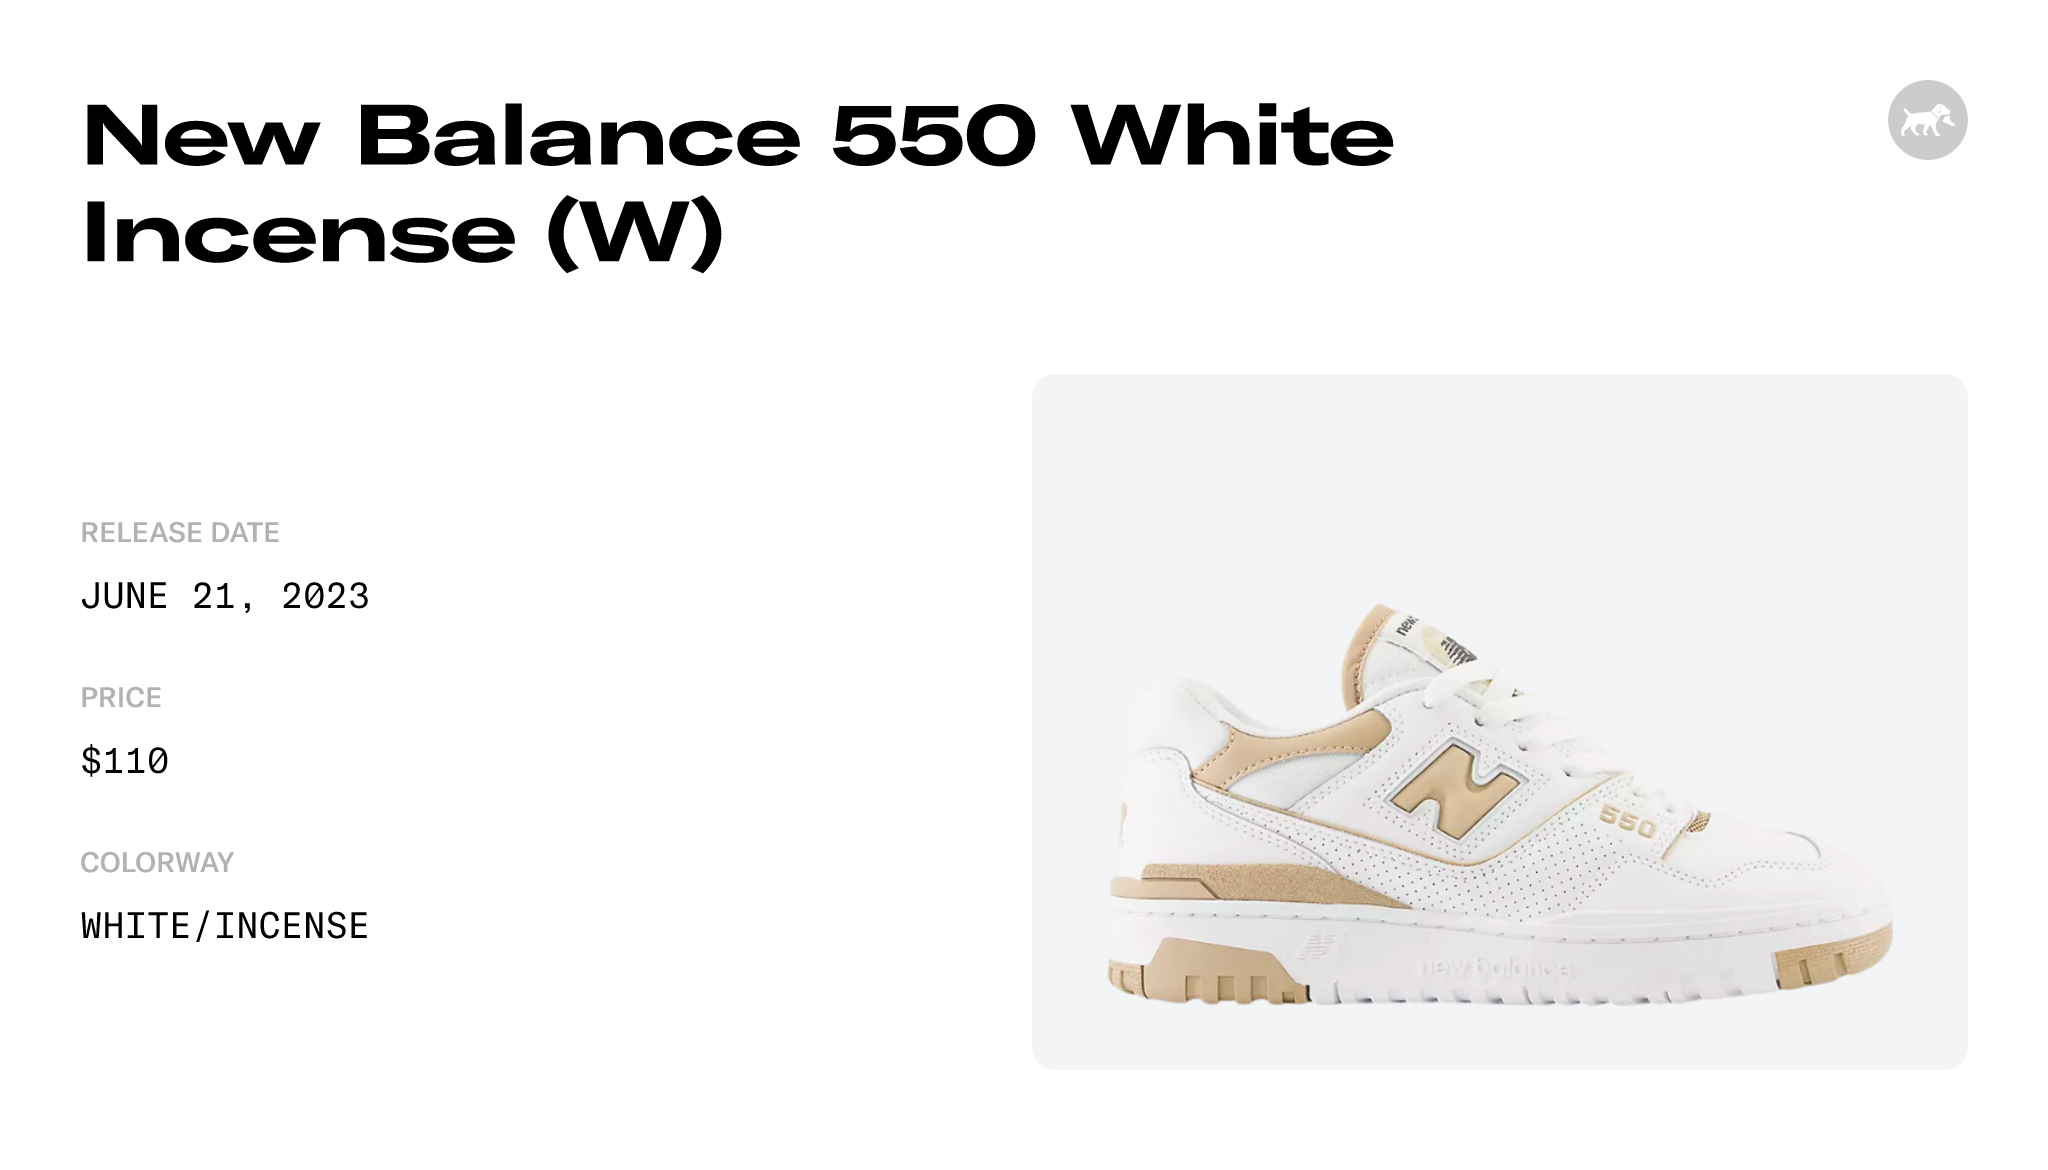 New Balance 550 White Incense (W) - BBW550BT Raffles and Release Date